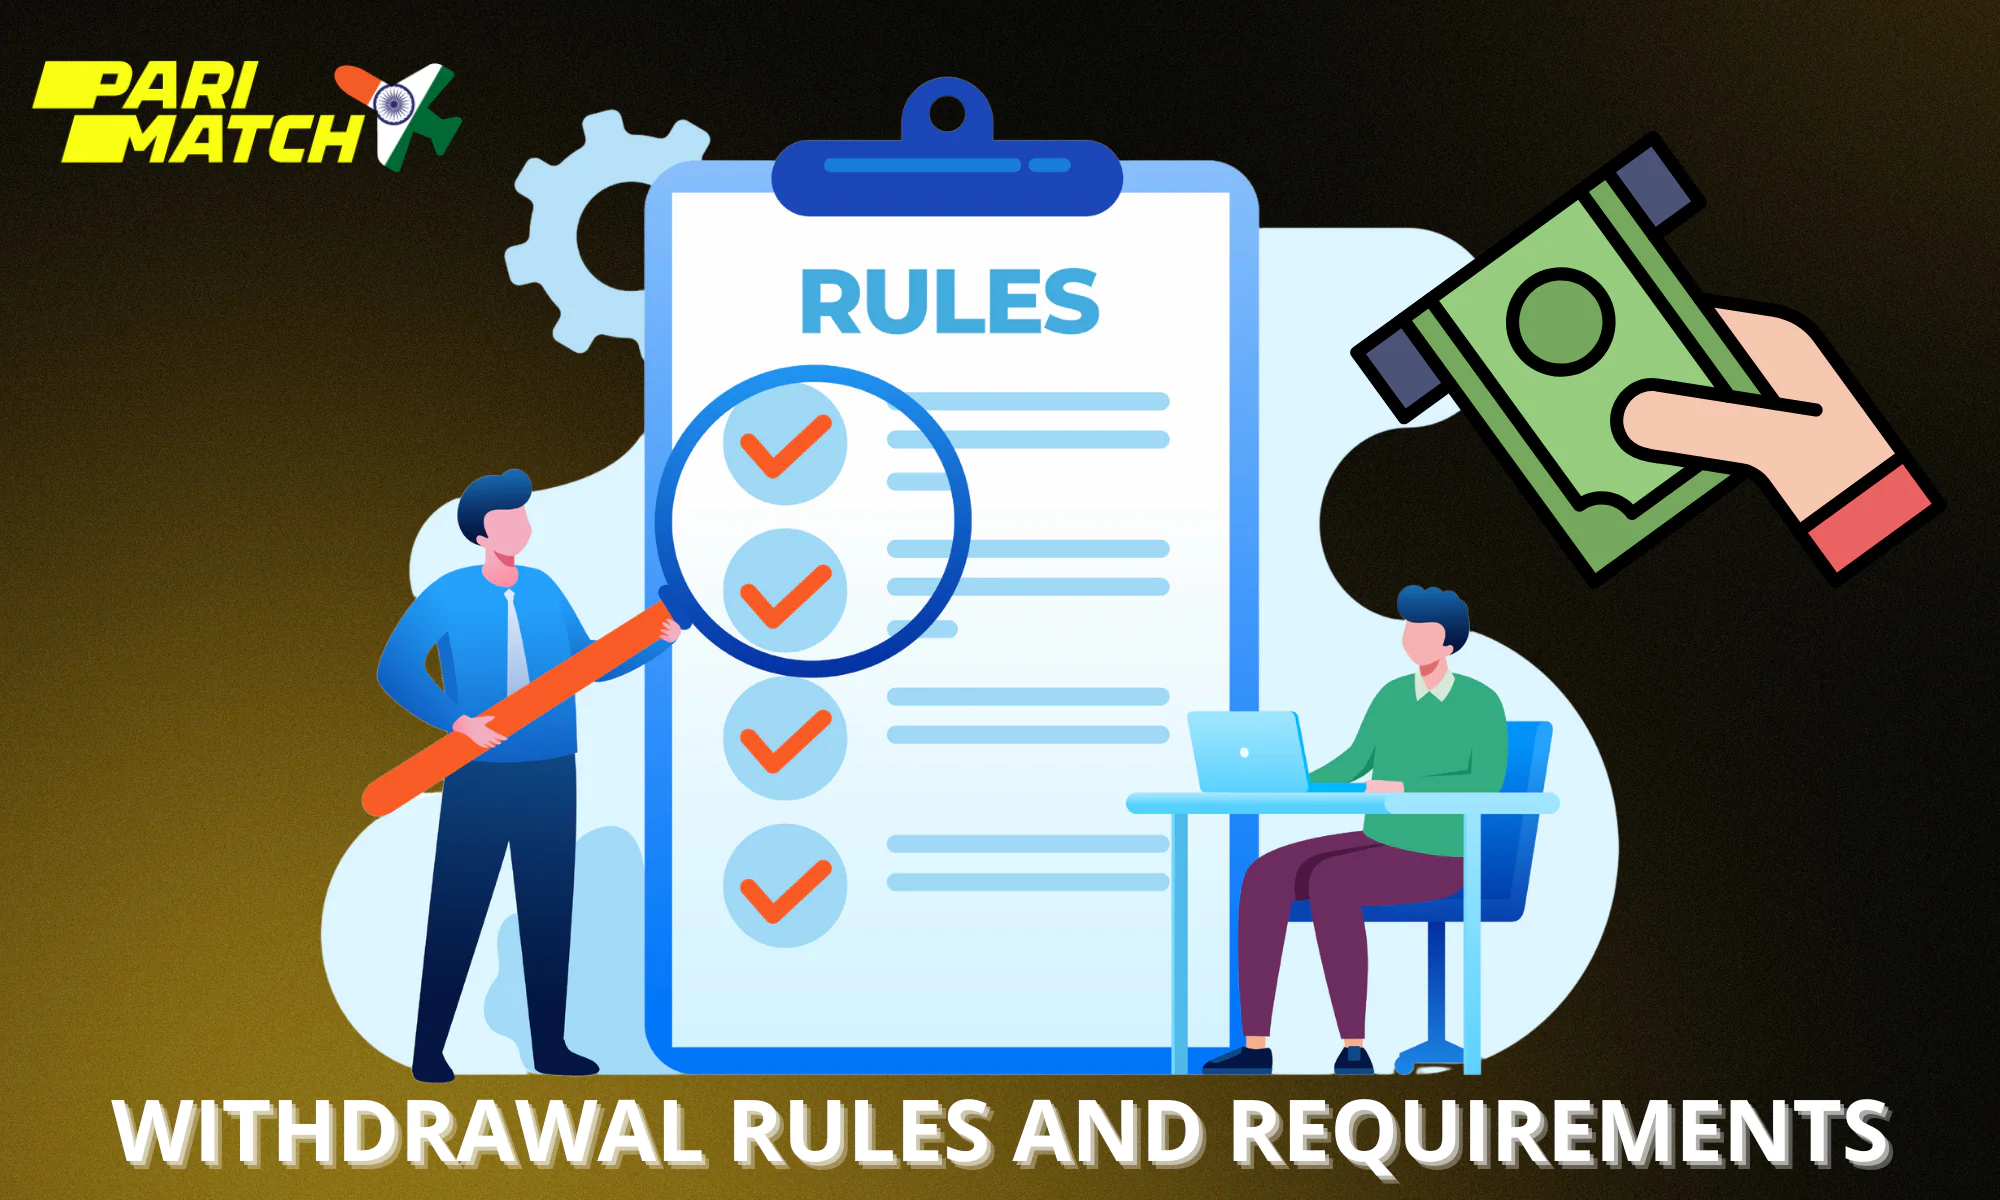 Some rules and requirements for withdrawing funds to Parimatch